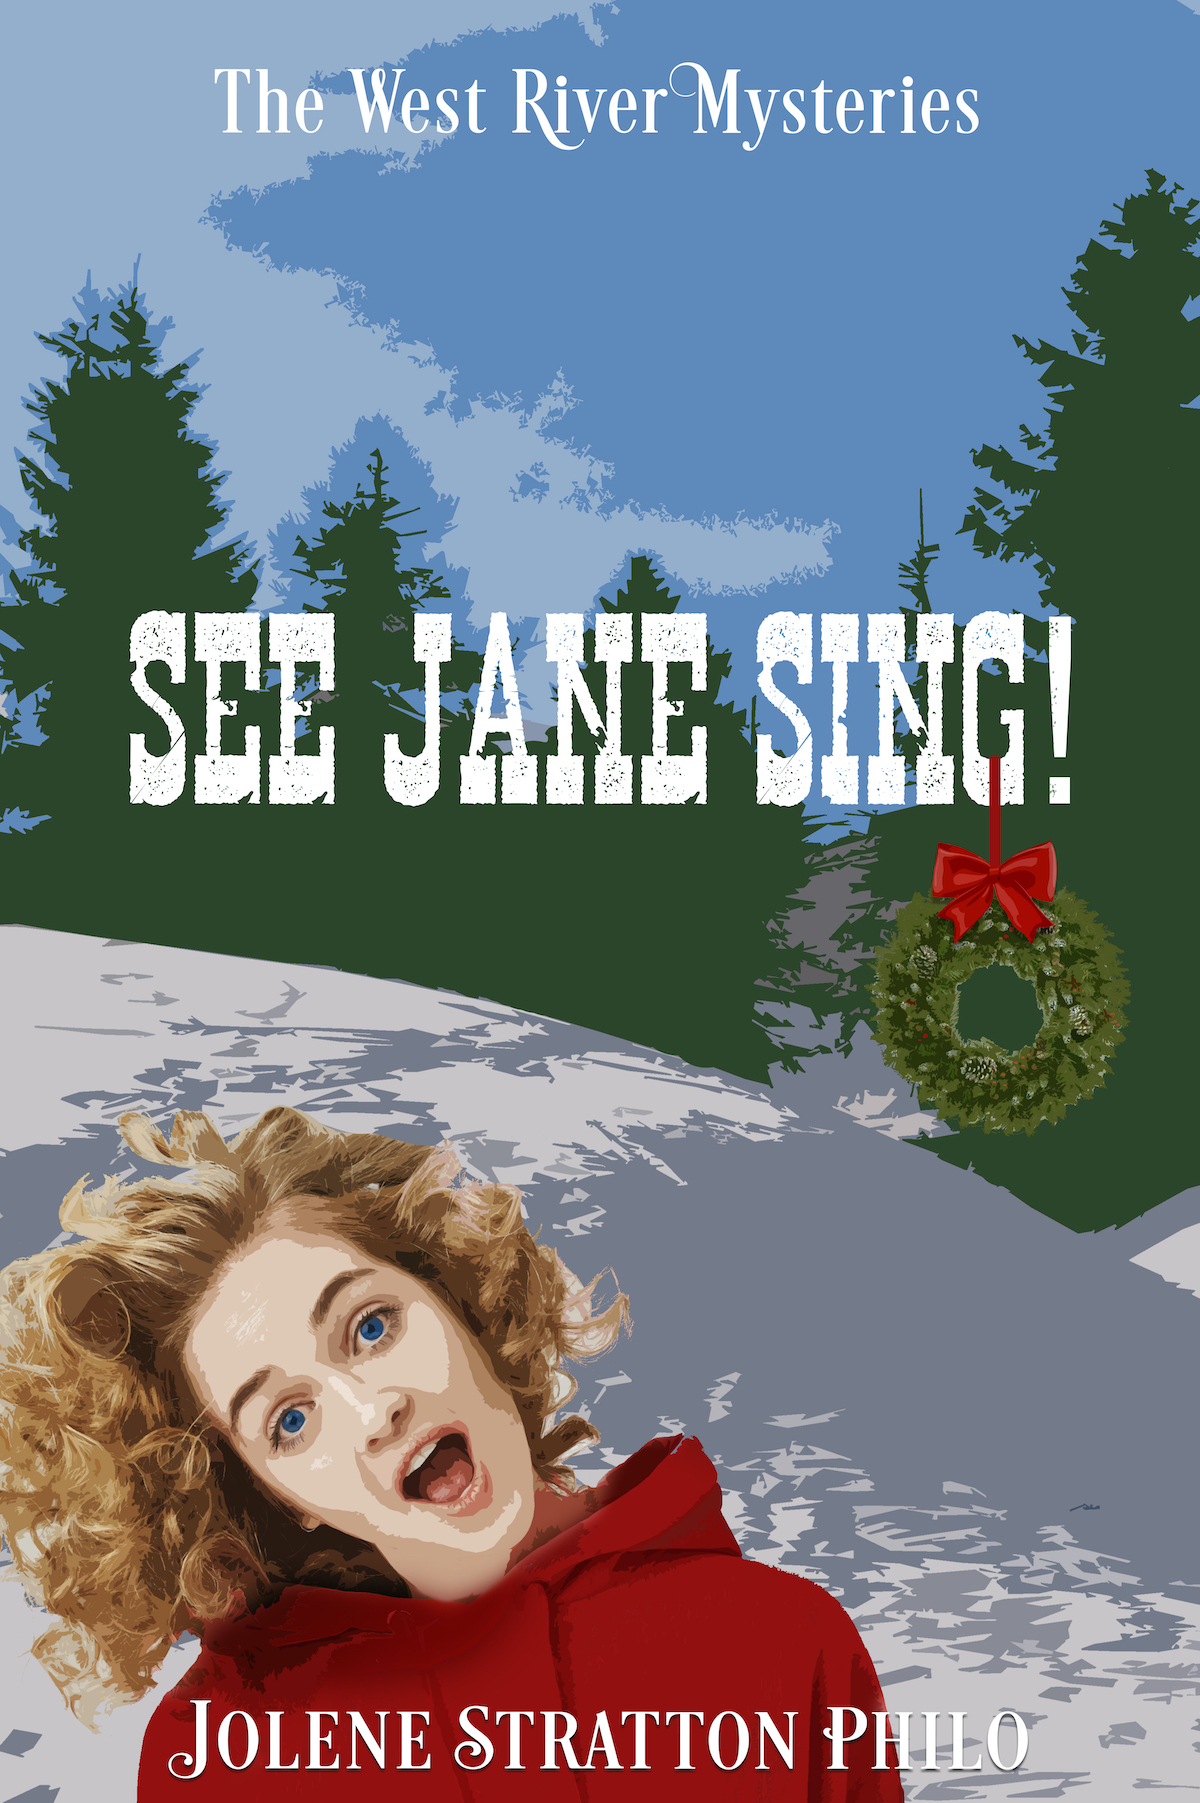 The See Jane Run! Book Cover Is Here